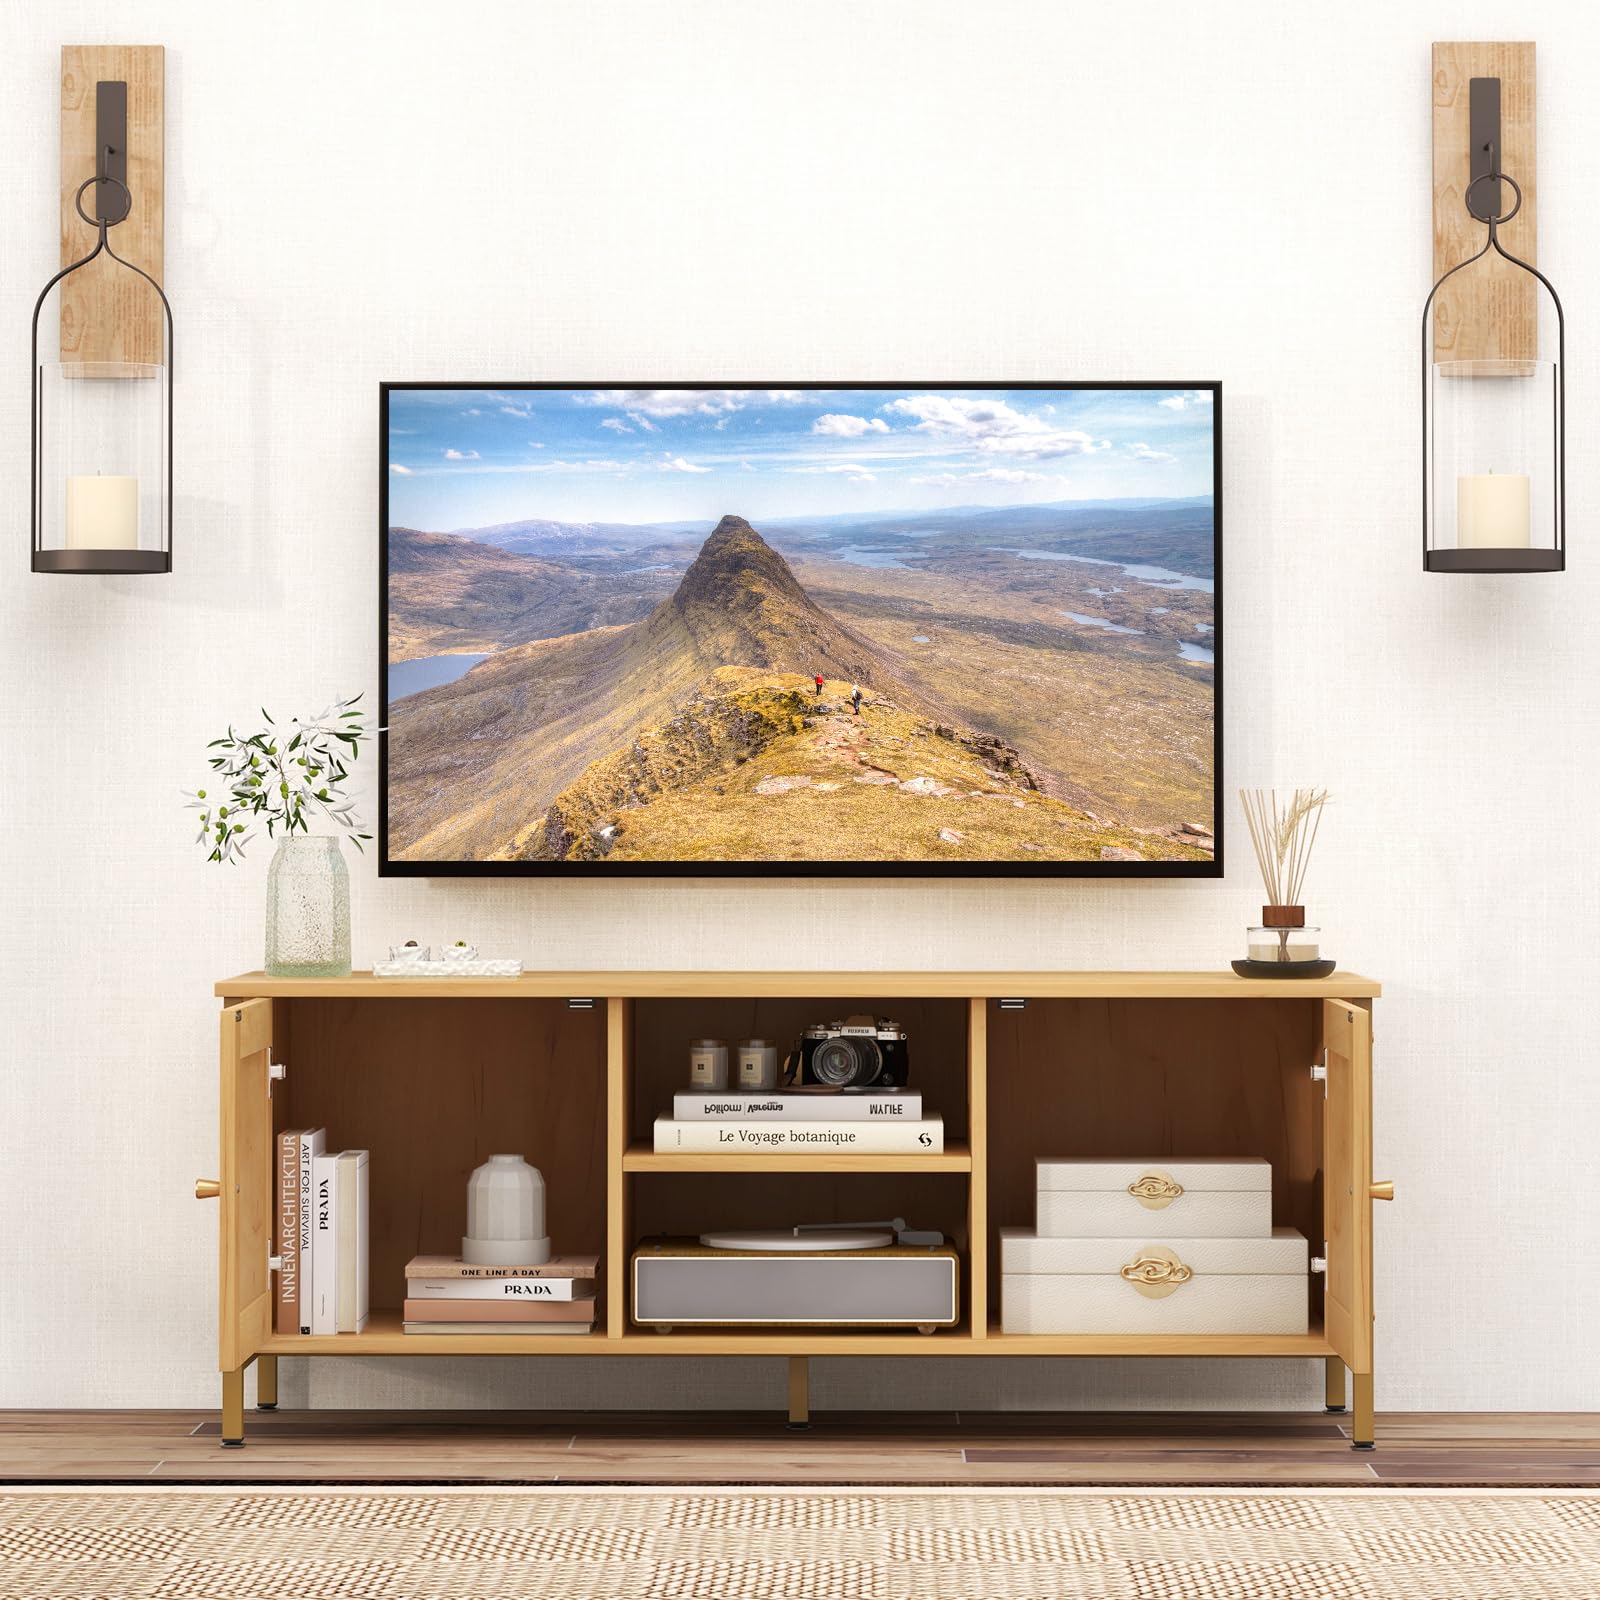 Giantex TV Stand for TVs up to 55'' - Farmhouse Entertainment Center with 2 Cabinets, Storage Shelves